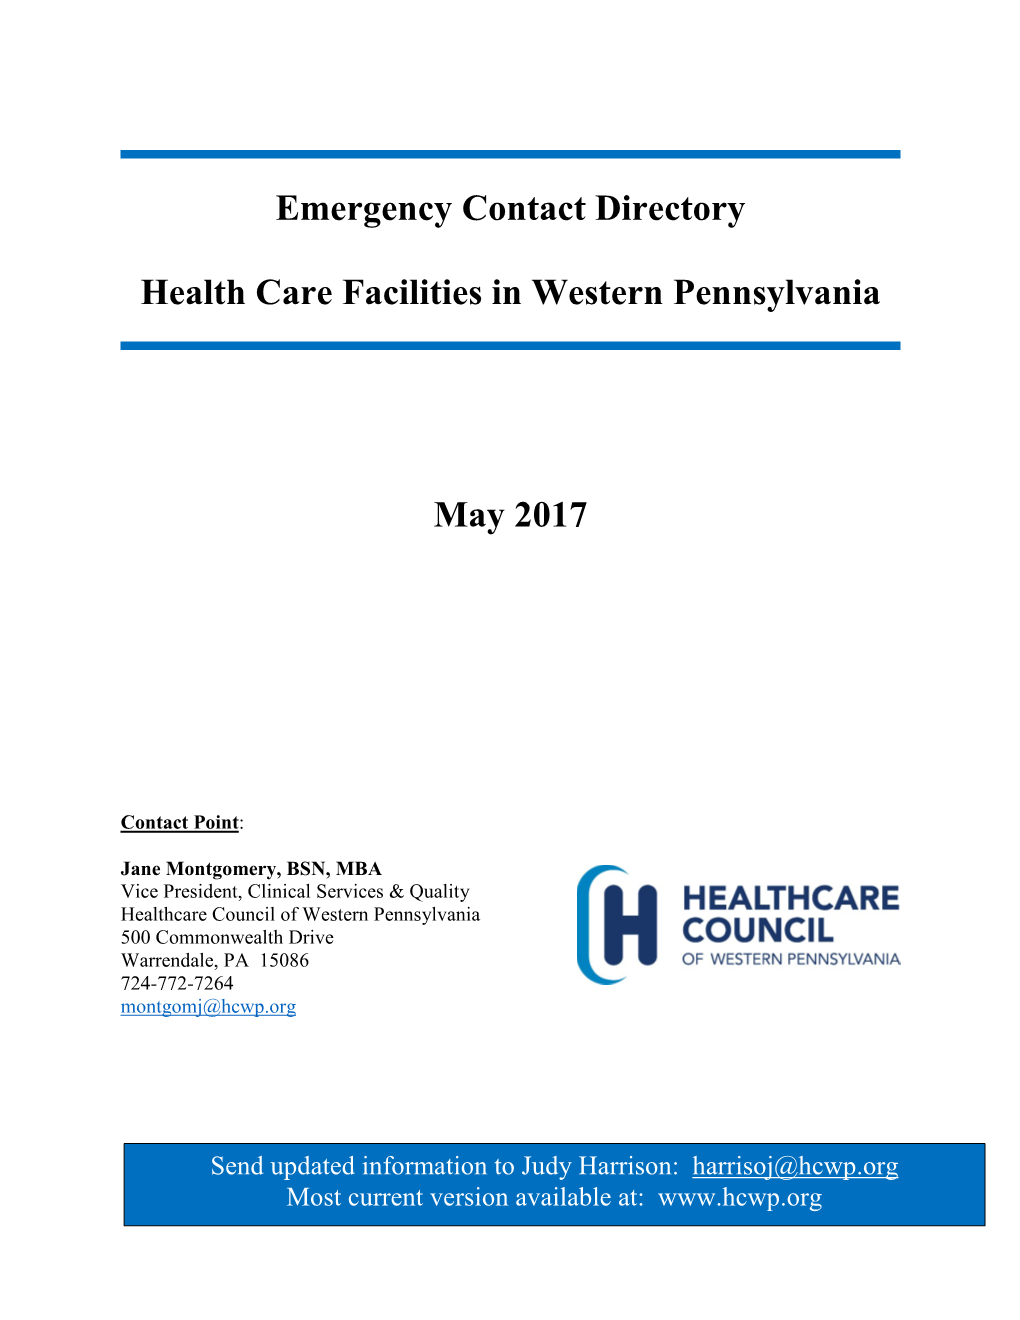 Emergency Contact Directory Health Care Facilities